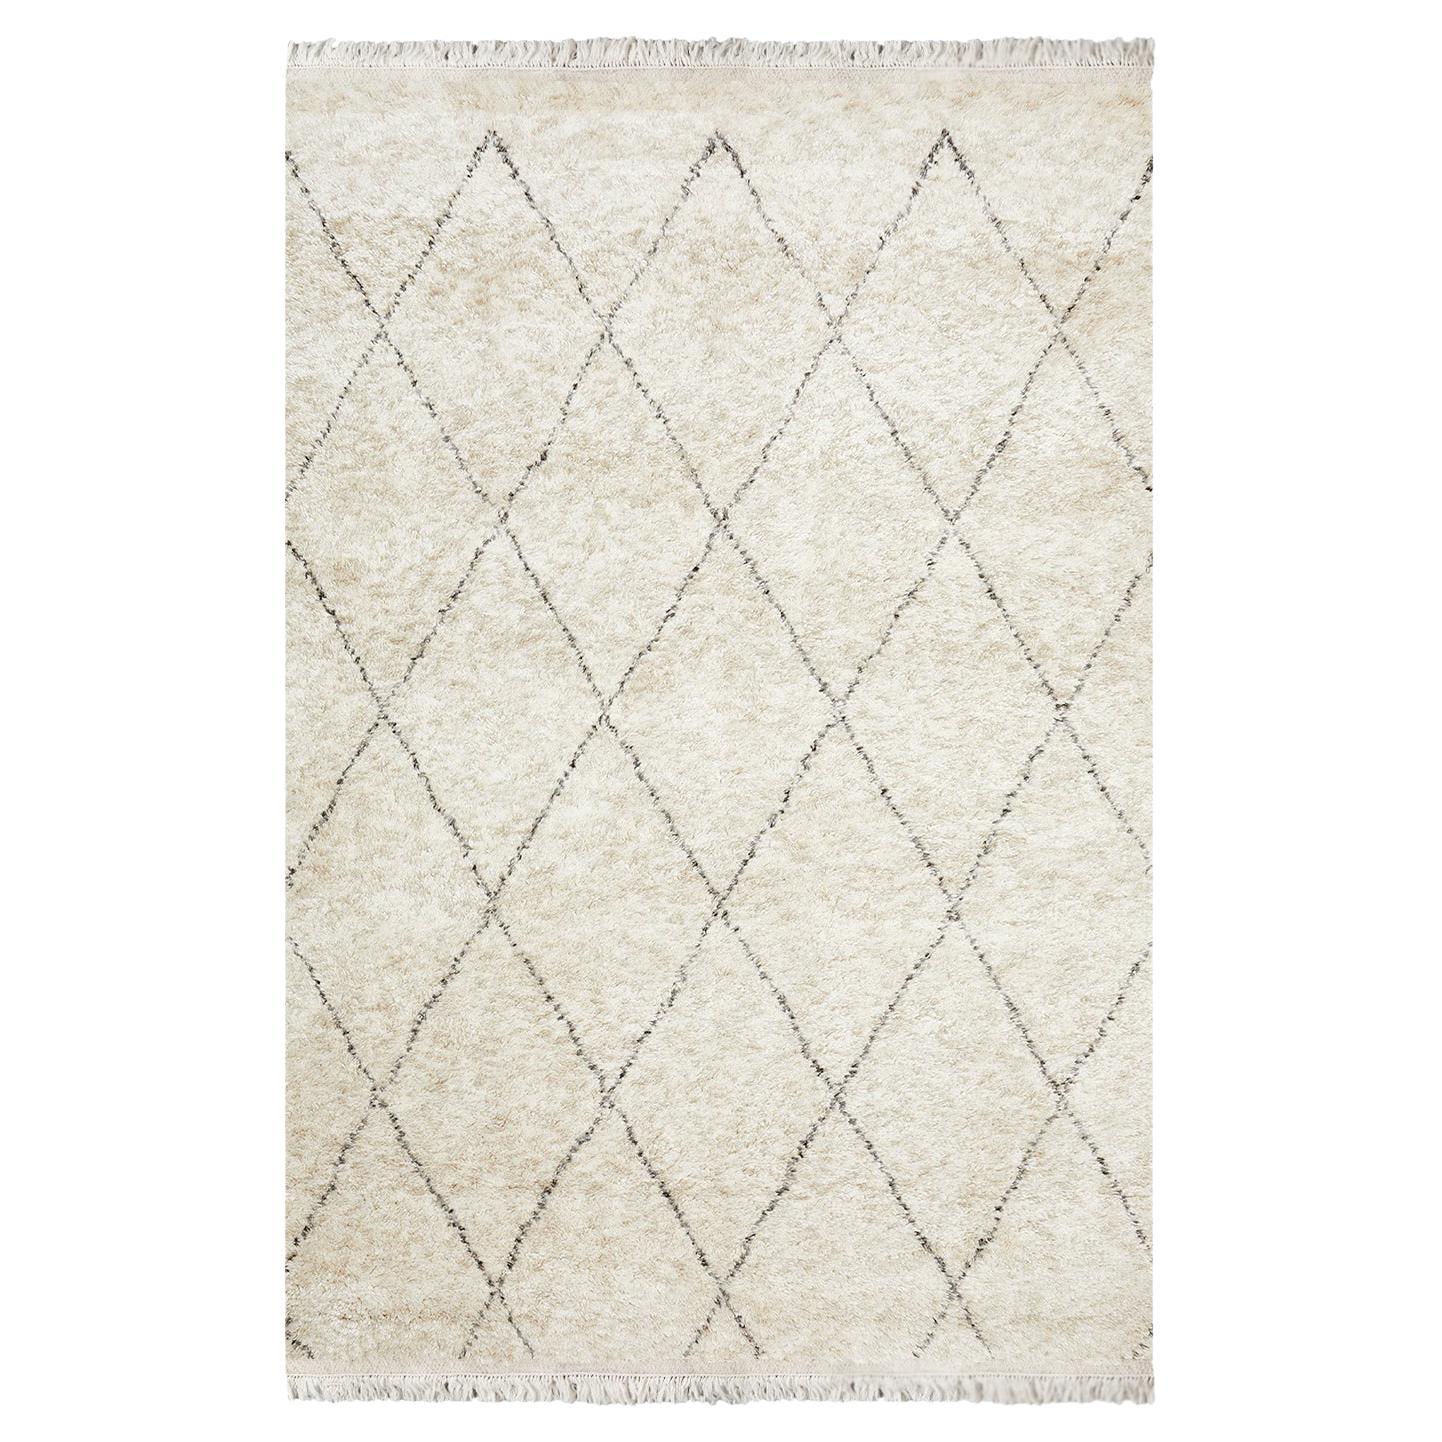 Solo Rugs Shaggy Moroccan Hand-Knotted Ivory Runner Area Rug